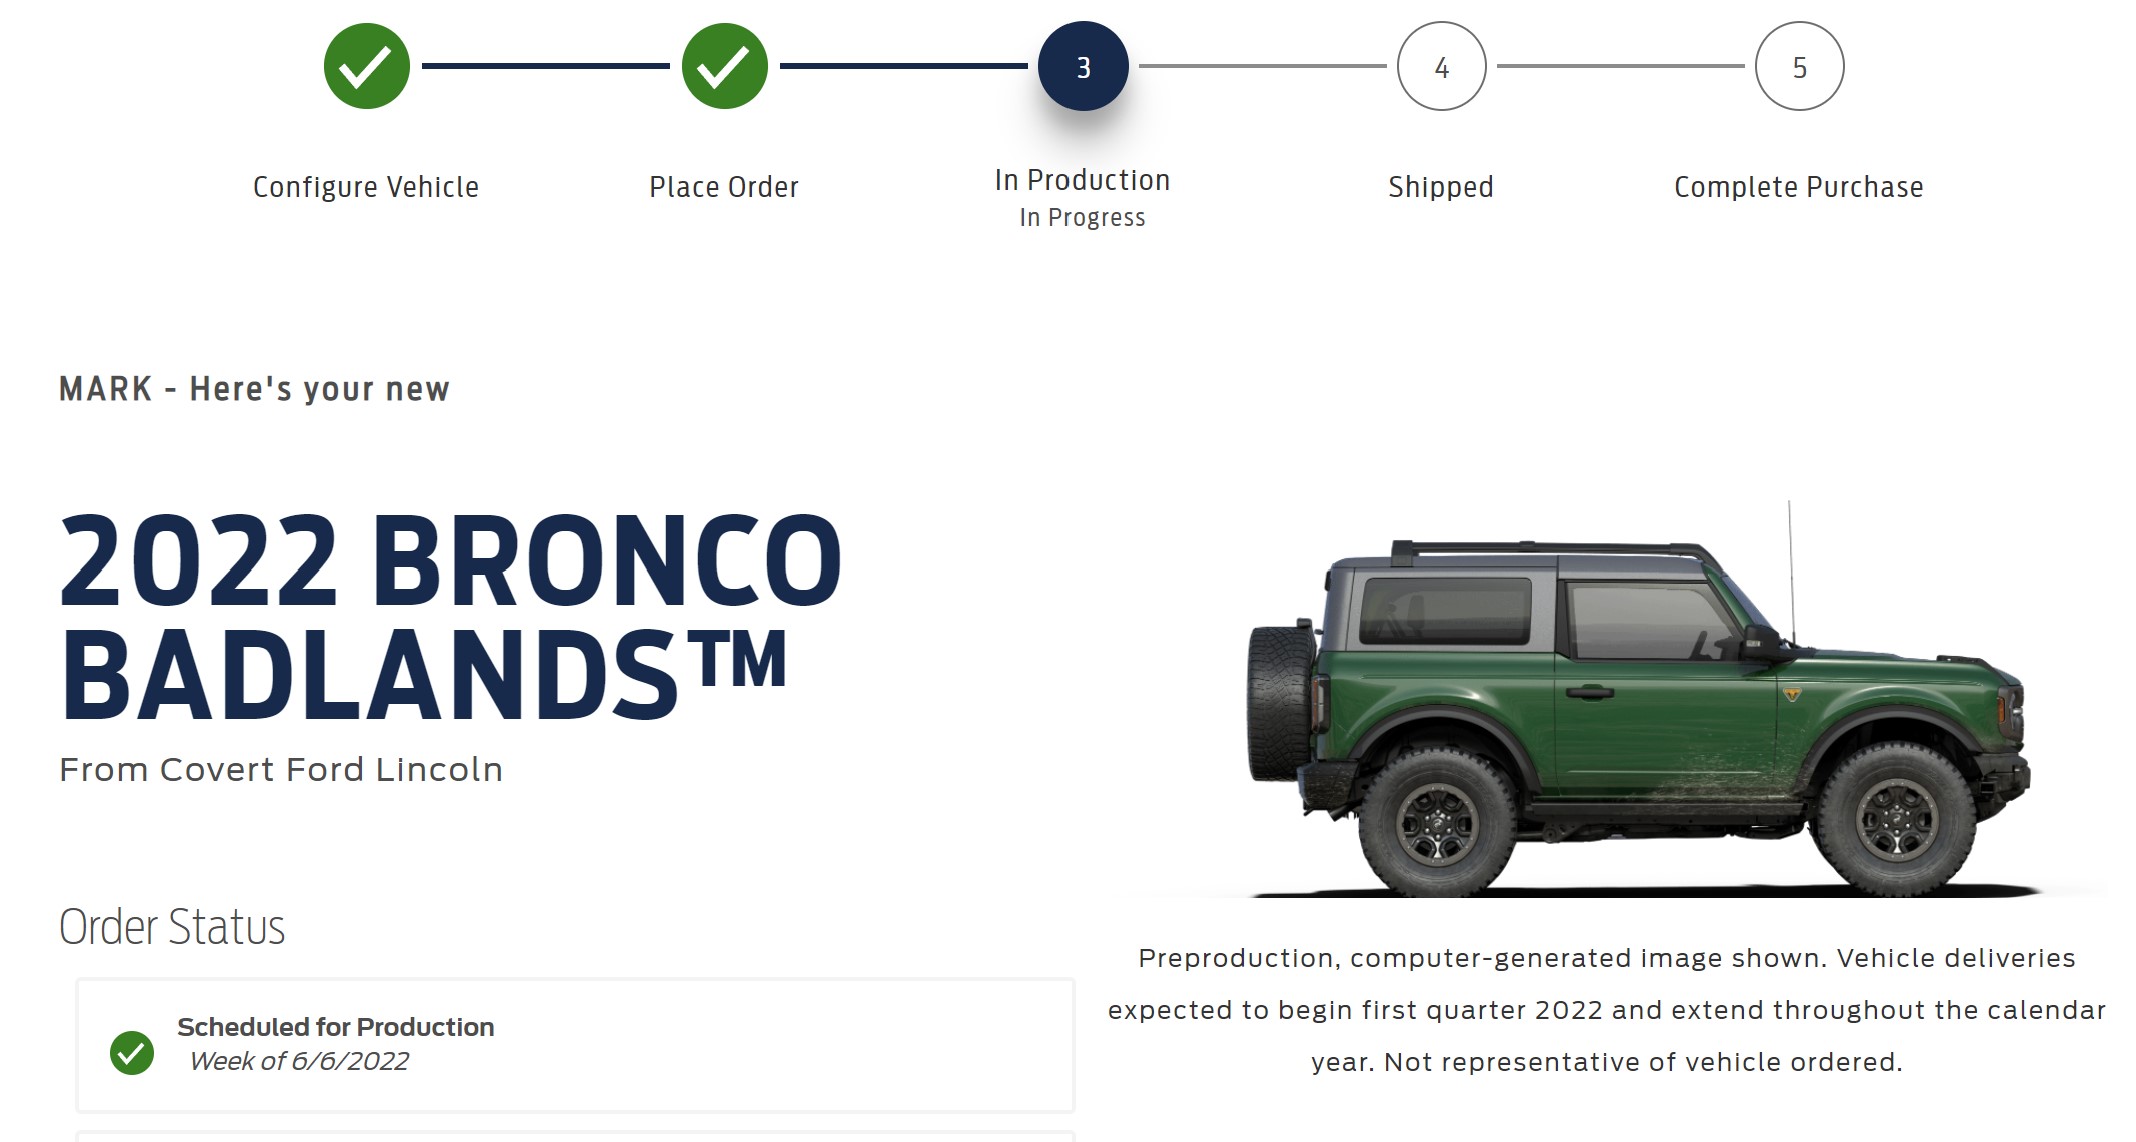 Ford Bronco ⏱ Bronco Scheduling Next Week (4/18) For Build Weeks 5/30-6/27 and 7/11-7/25 Scheduled